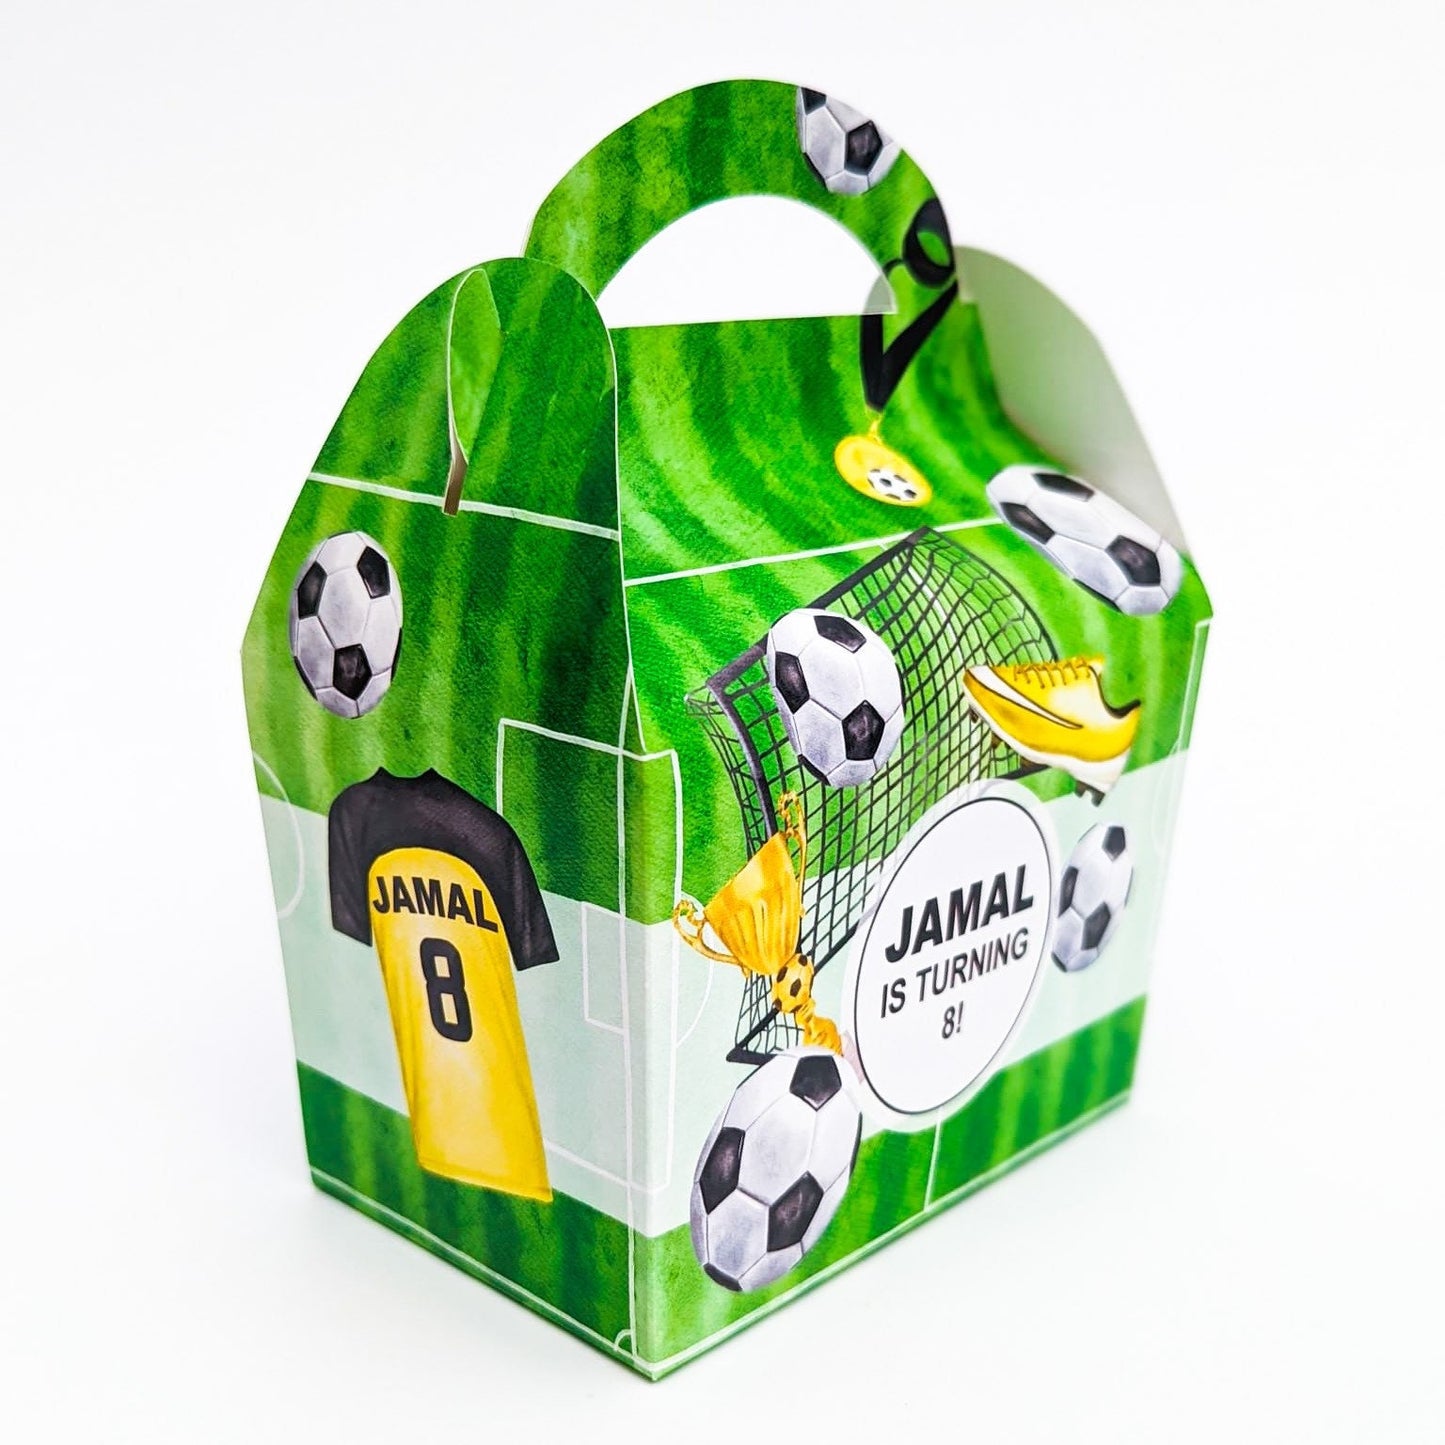 Football team soccer Personalised Children’s Party Box Gift Bag Favour